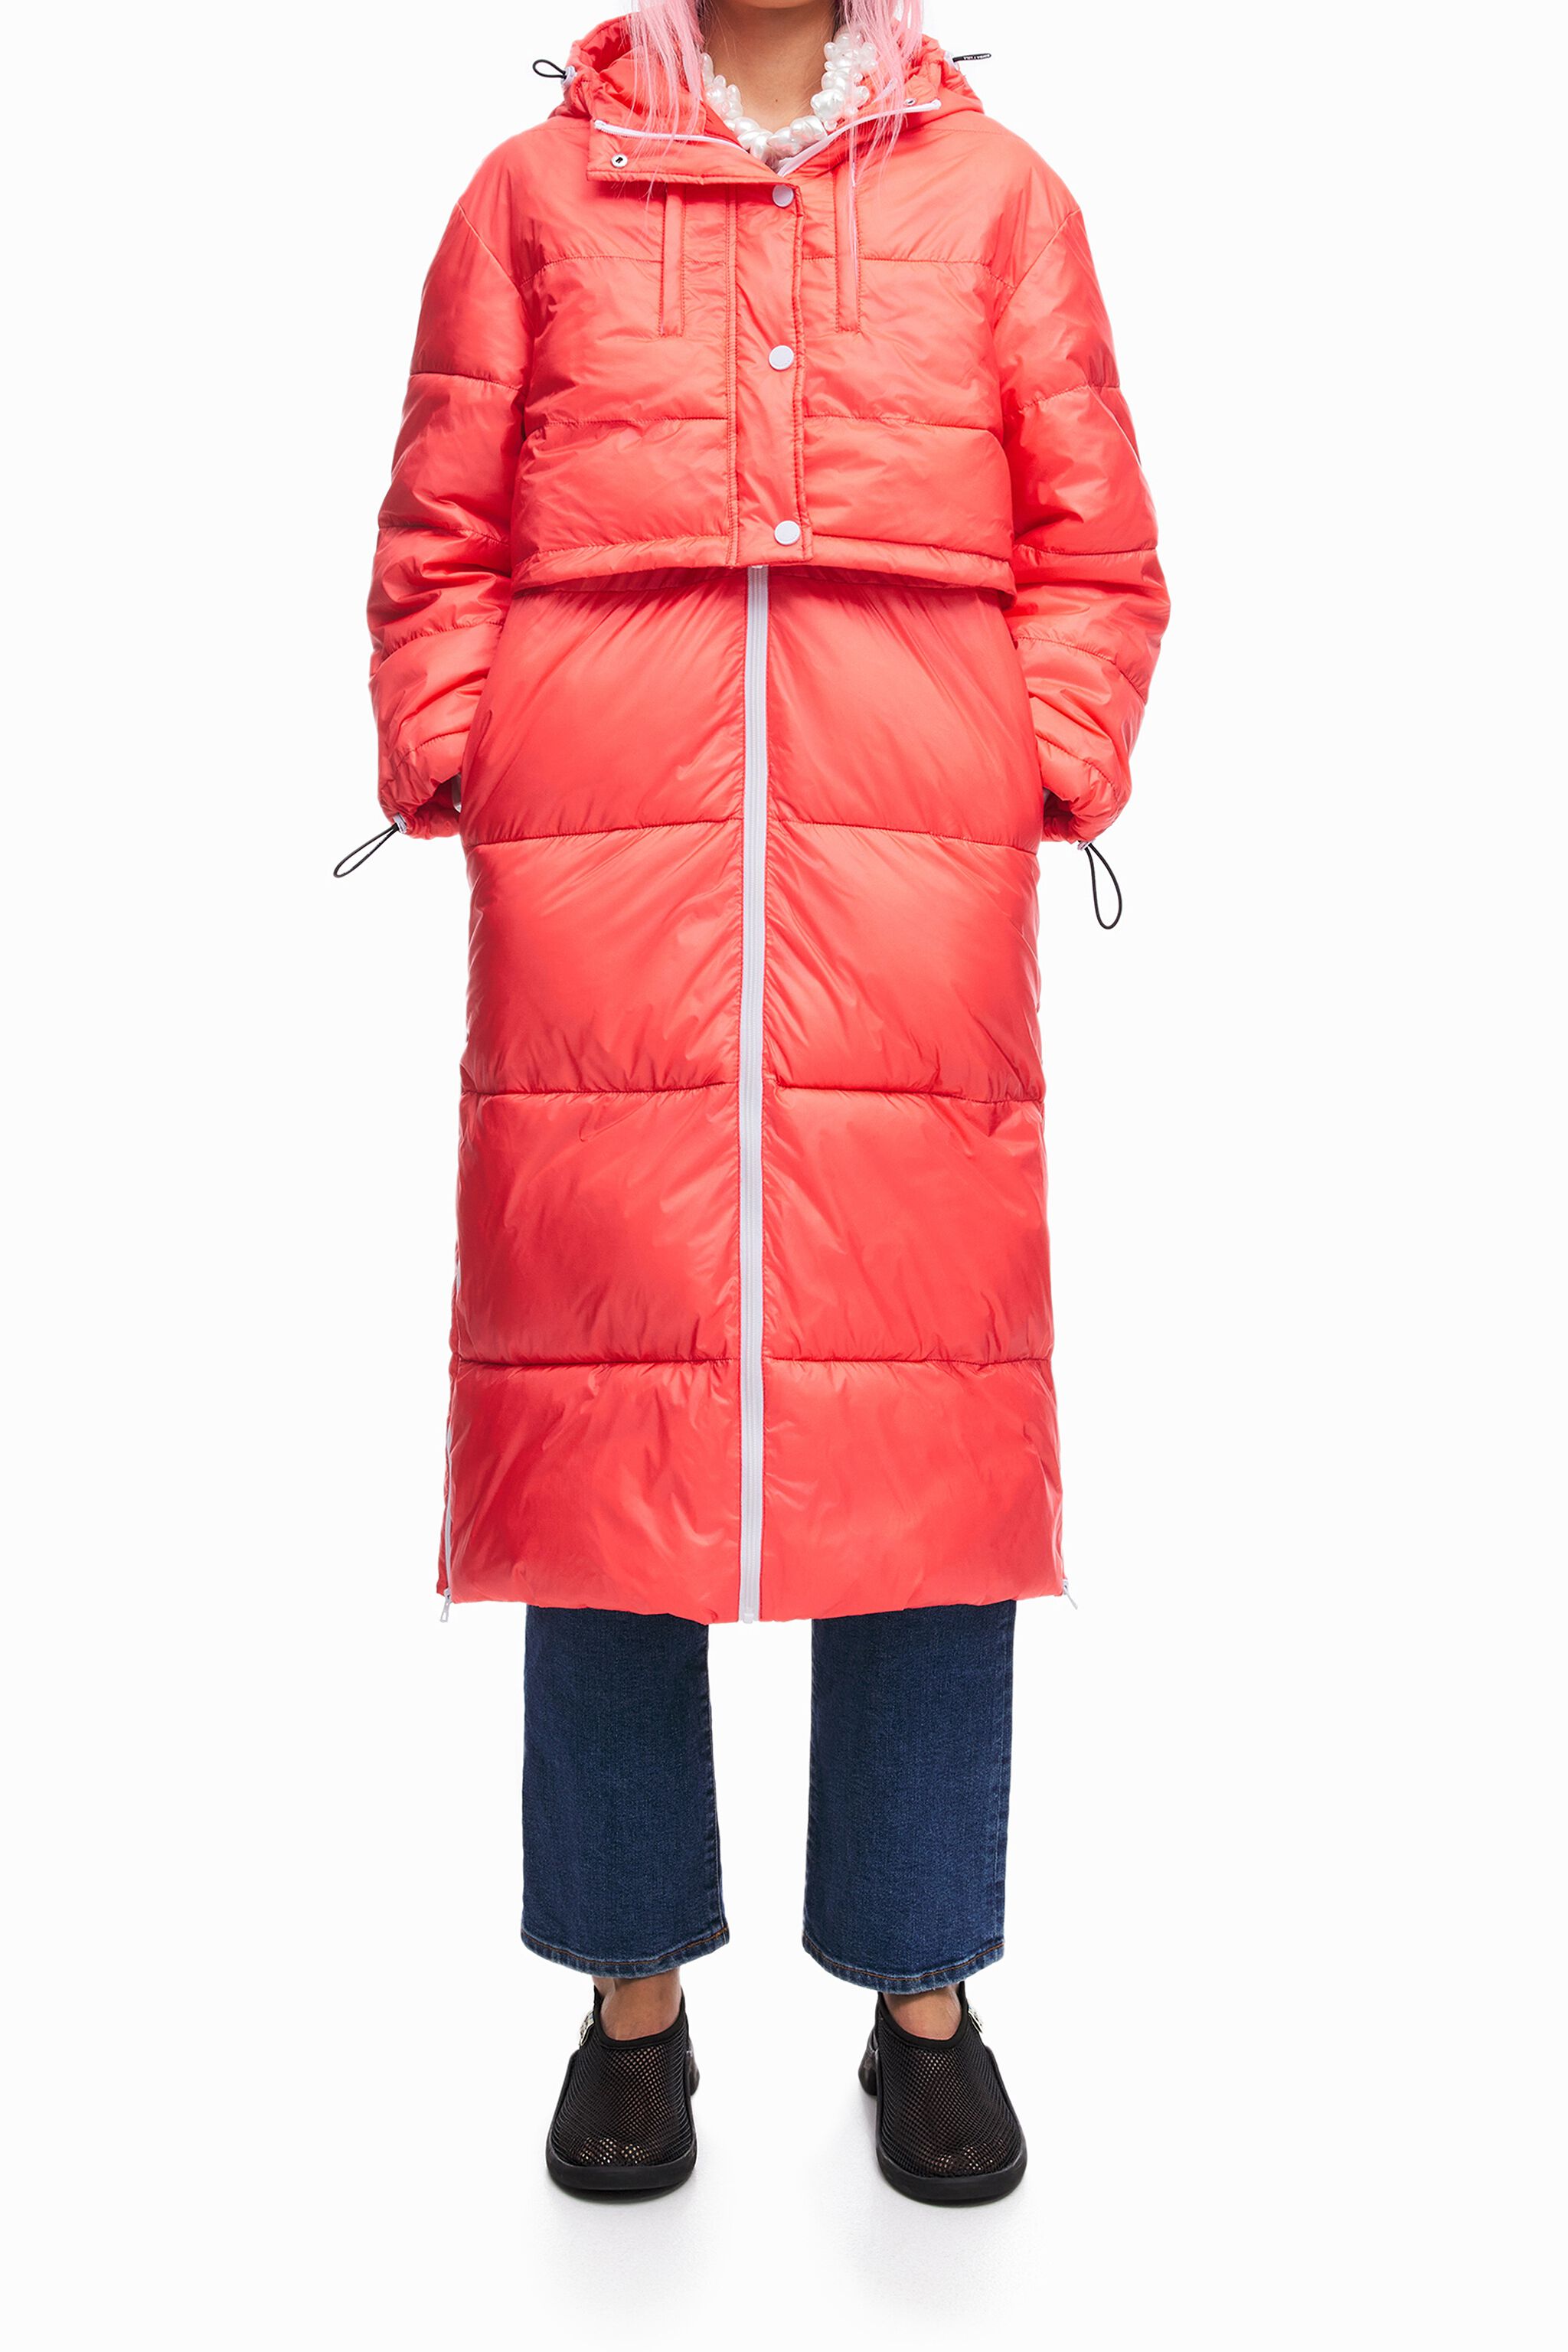 coral puffer jacket